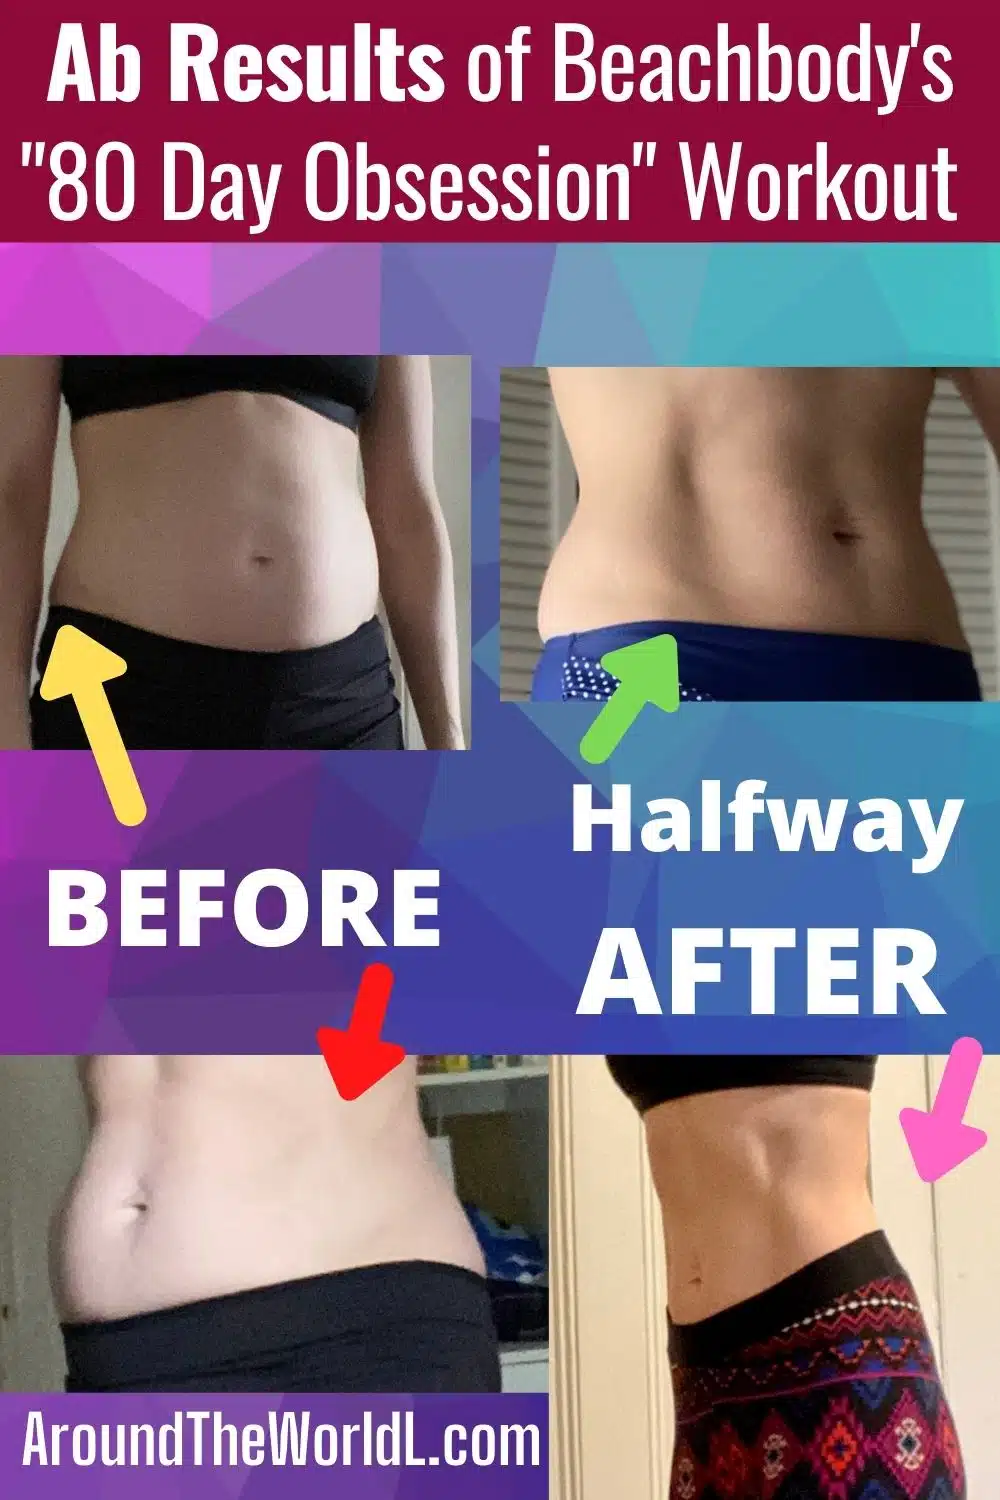 Ab results of 80 Day Obsession on Beachbody